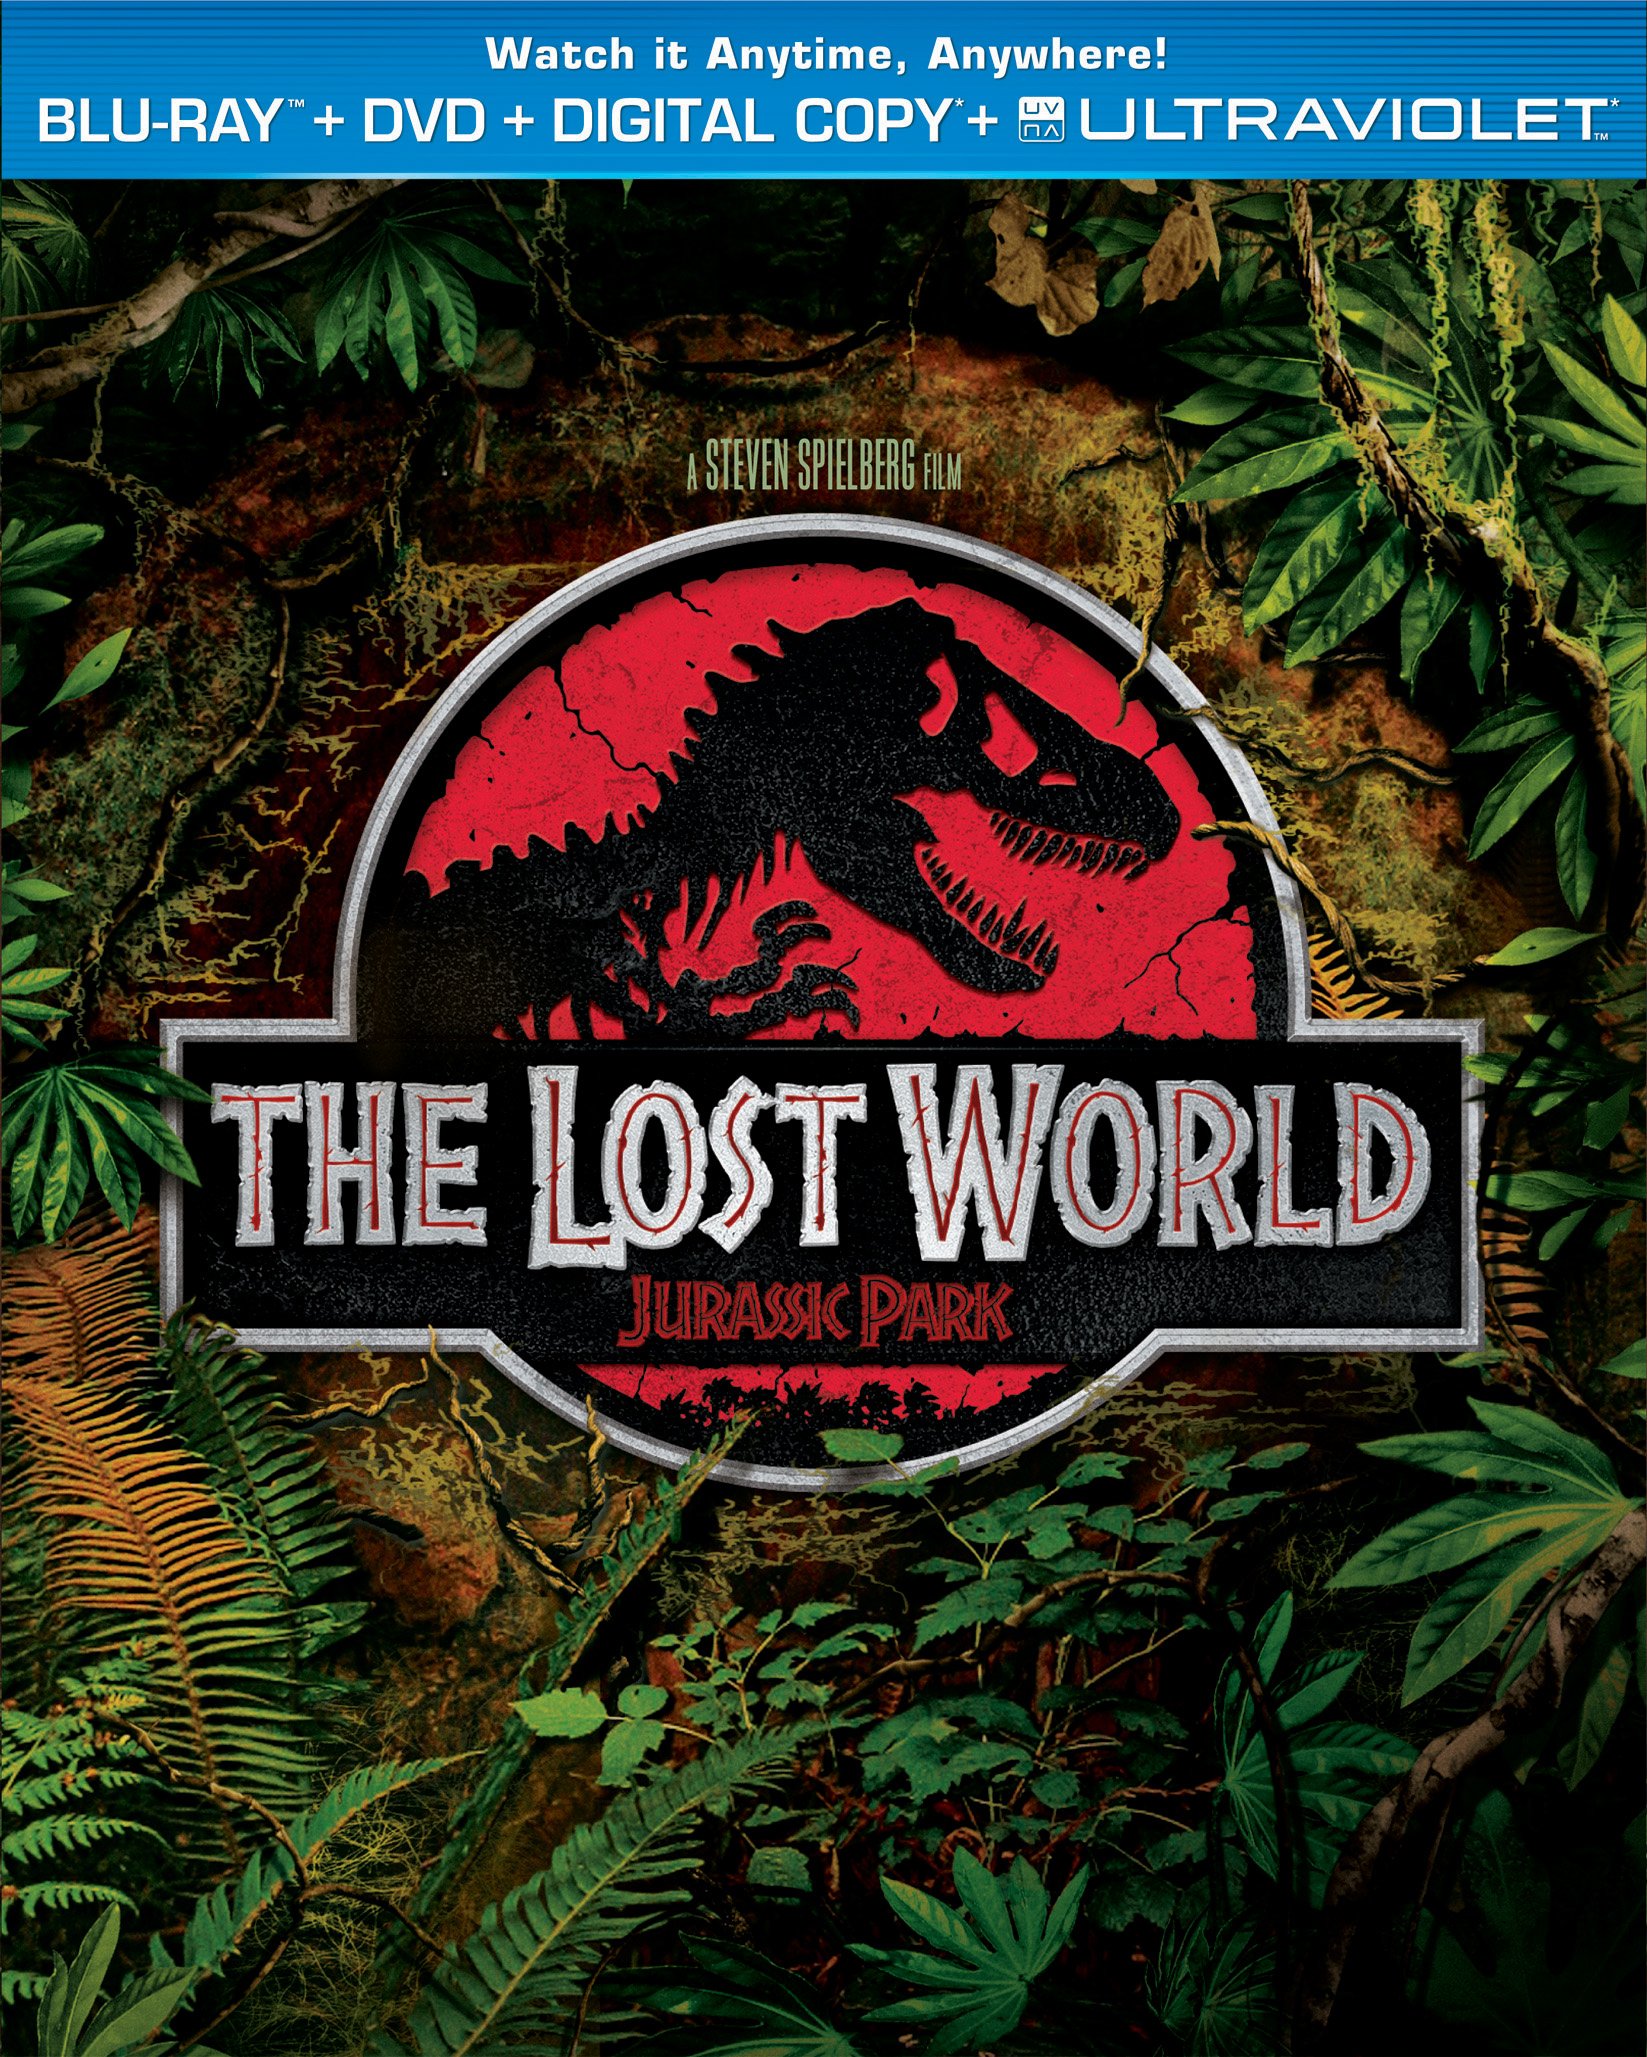 The Lost World: Jurassic Park DVD Release Date